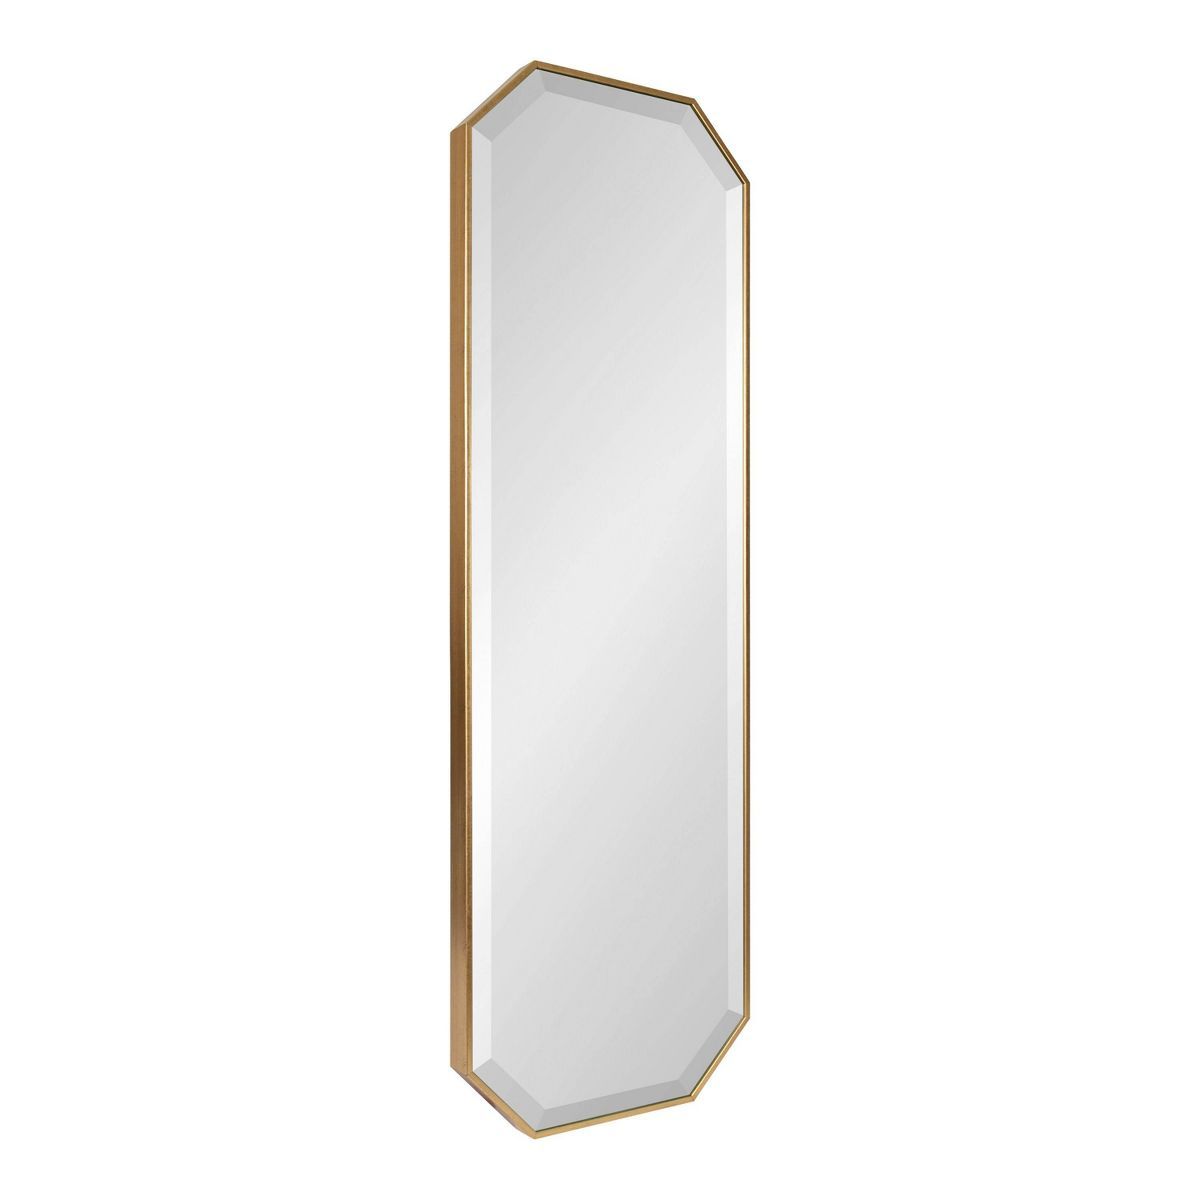 16" x 48" Rhodes Full Length Wall Mirror Gold - Kate & Laurel All Things Decor | Target